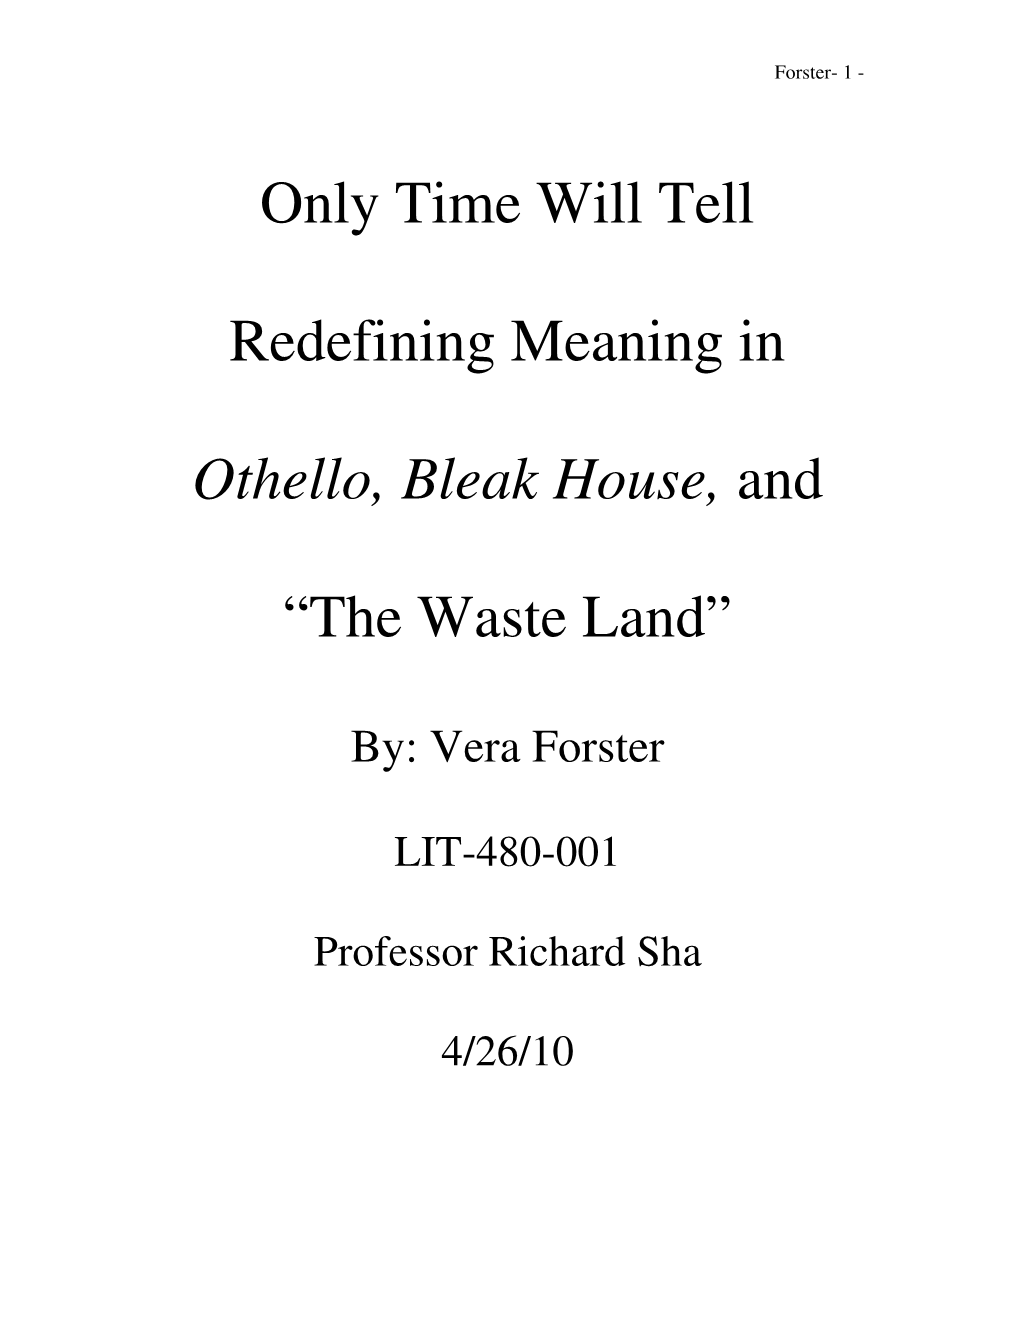 Only Time Will Tell Redefining Meaning in Othello, Bleak House, and “The Waste Land”